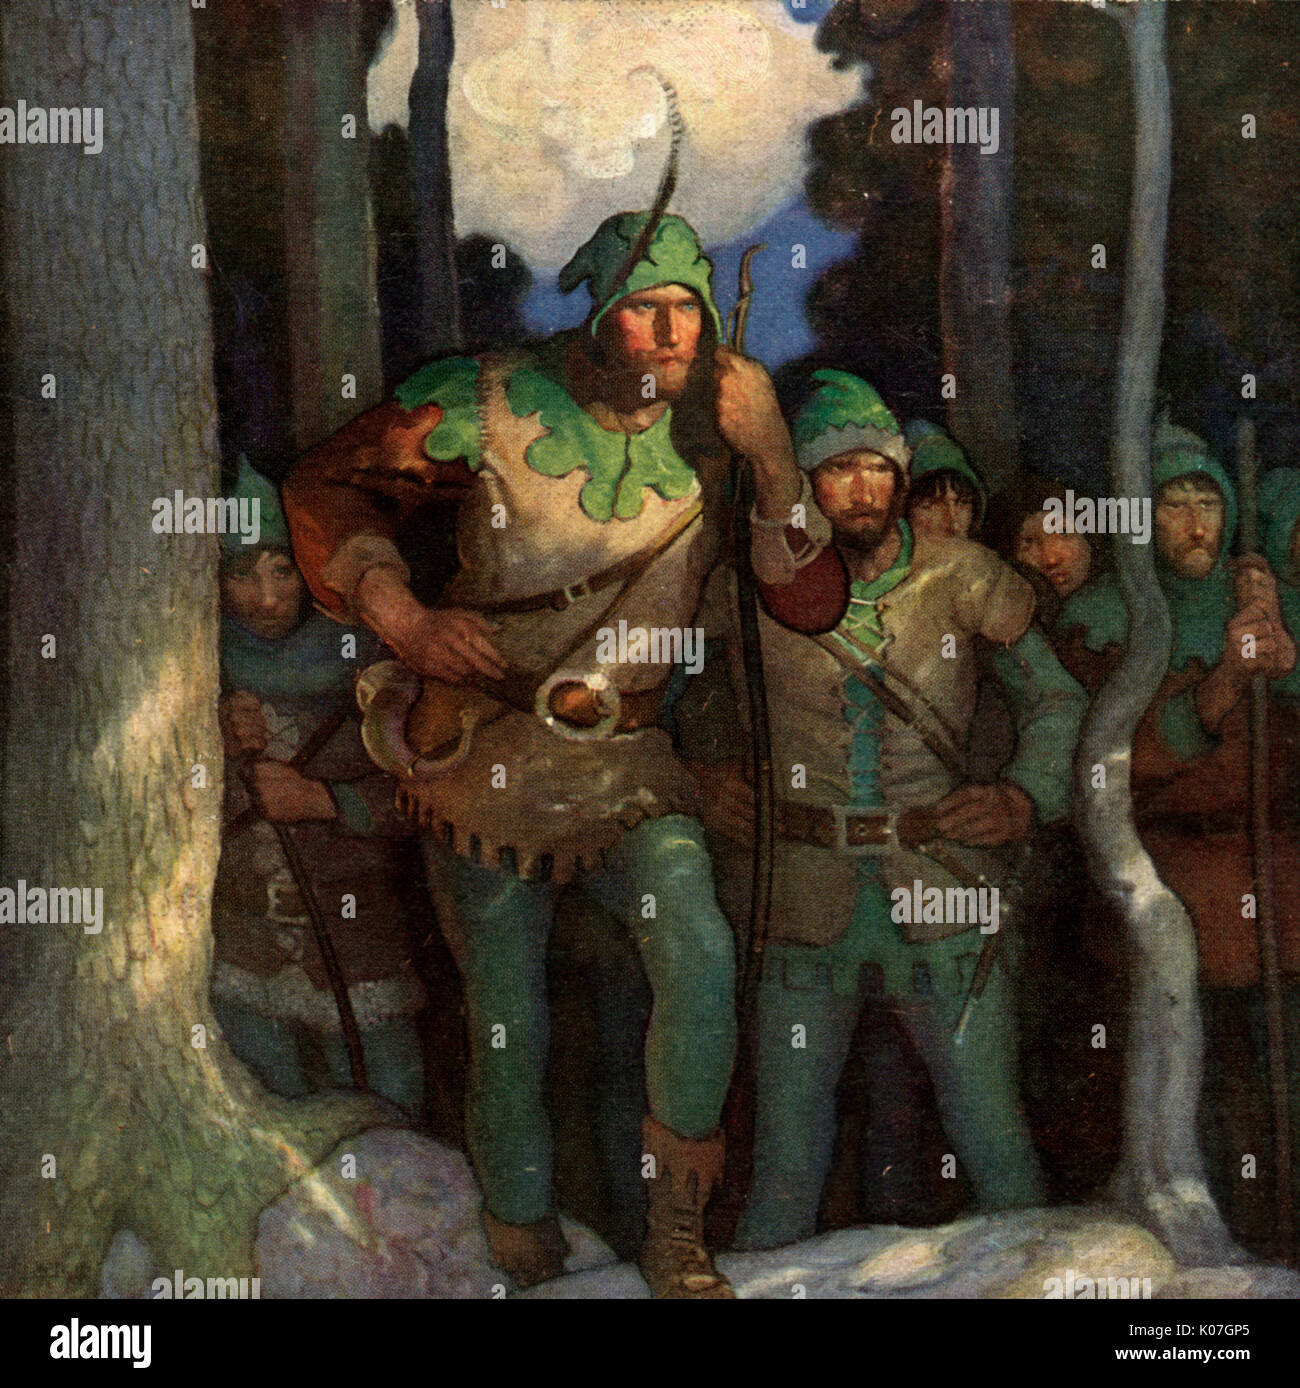 Robin and his Merry Men emerge  cautiously from the forest.         Date: 1921 Stock Photo